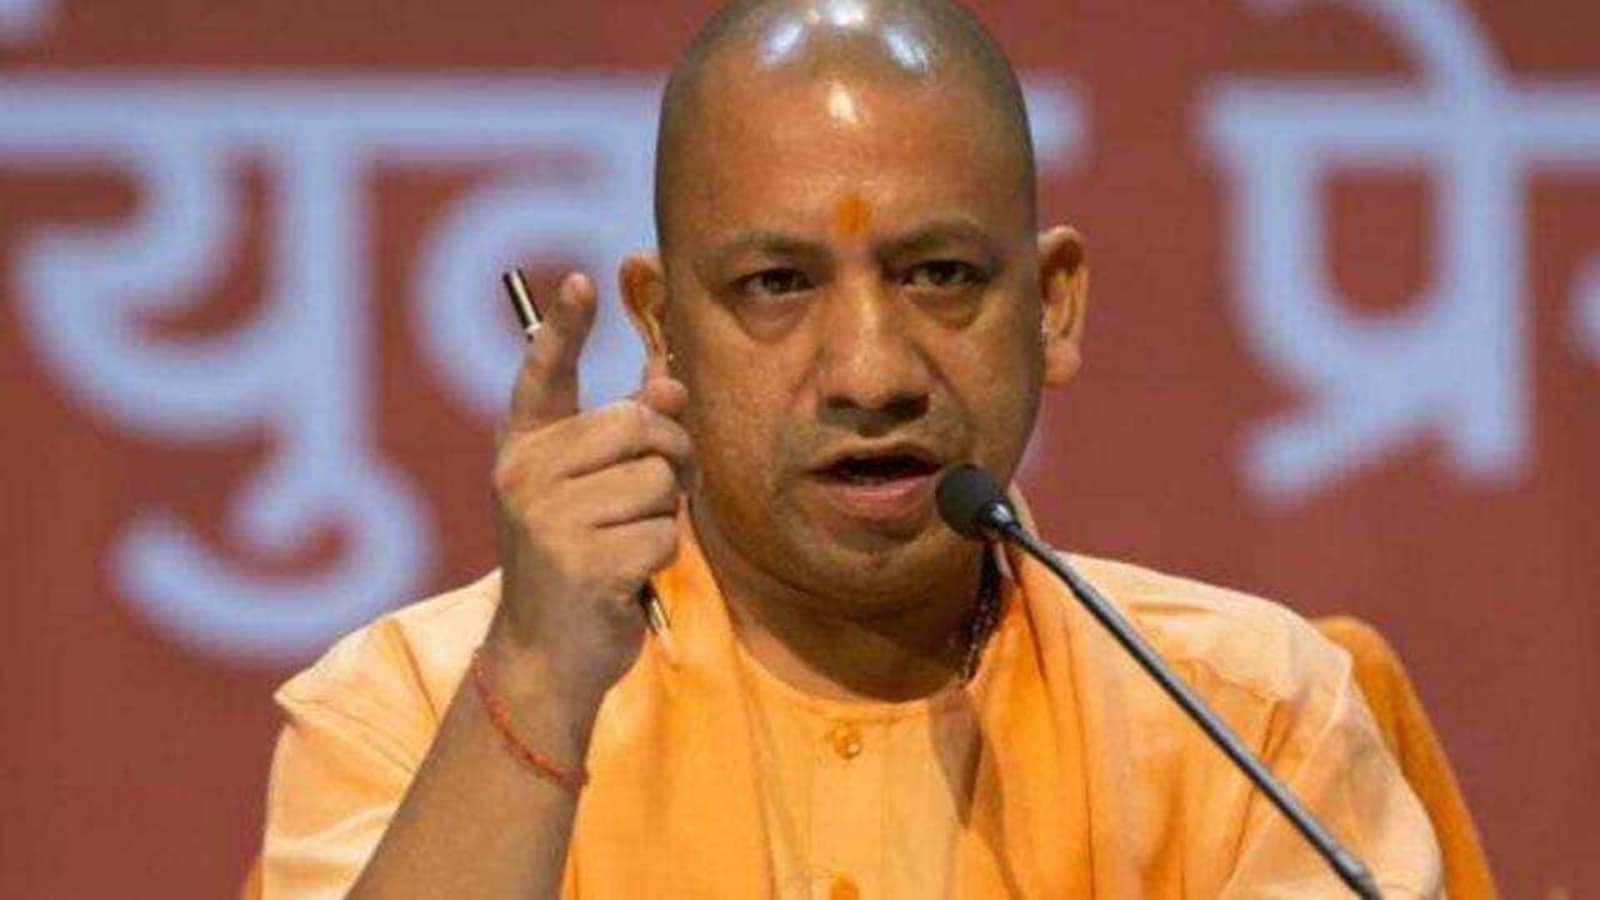 Ensure drinking water to 1 crore houses by March next year: U.P. CM Yogi